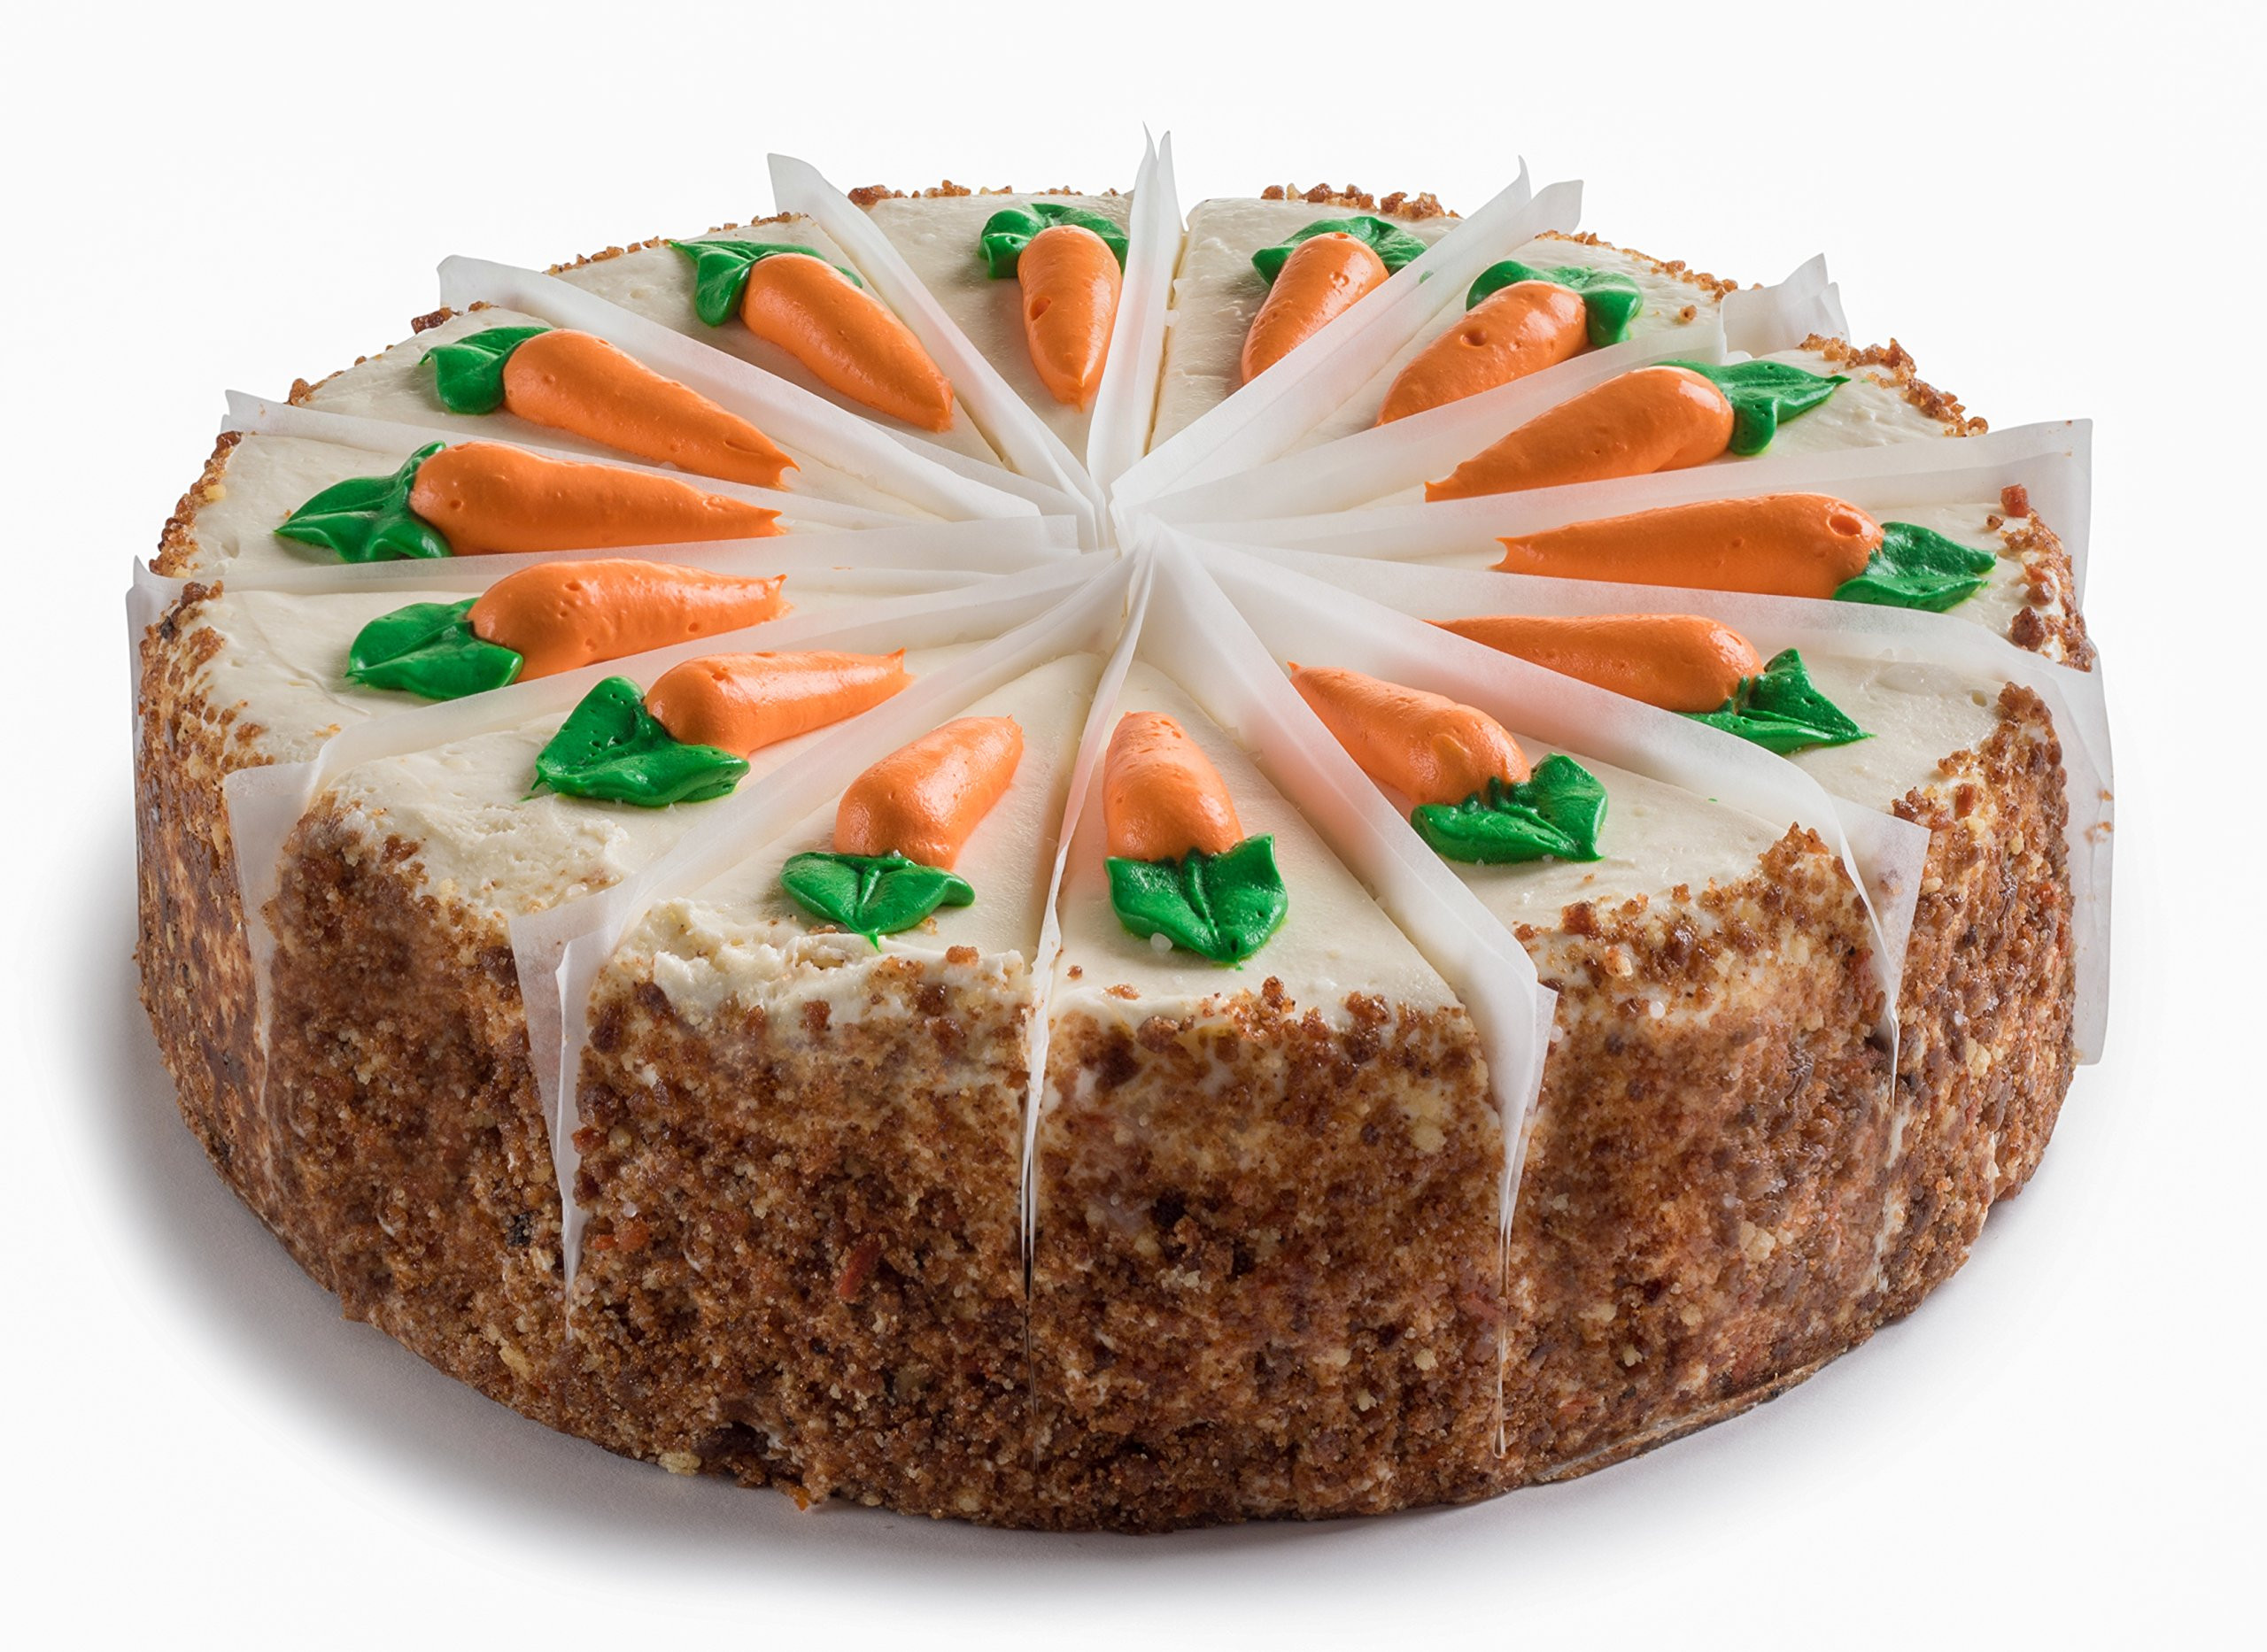 Gourmet Carrot Cake
 Blueberry Cheesecake Amazon Grocery & Gourmet Food